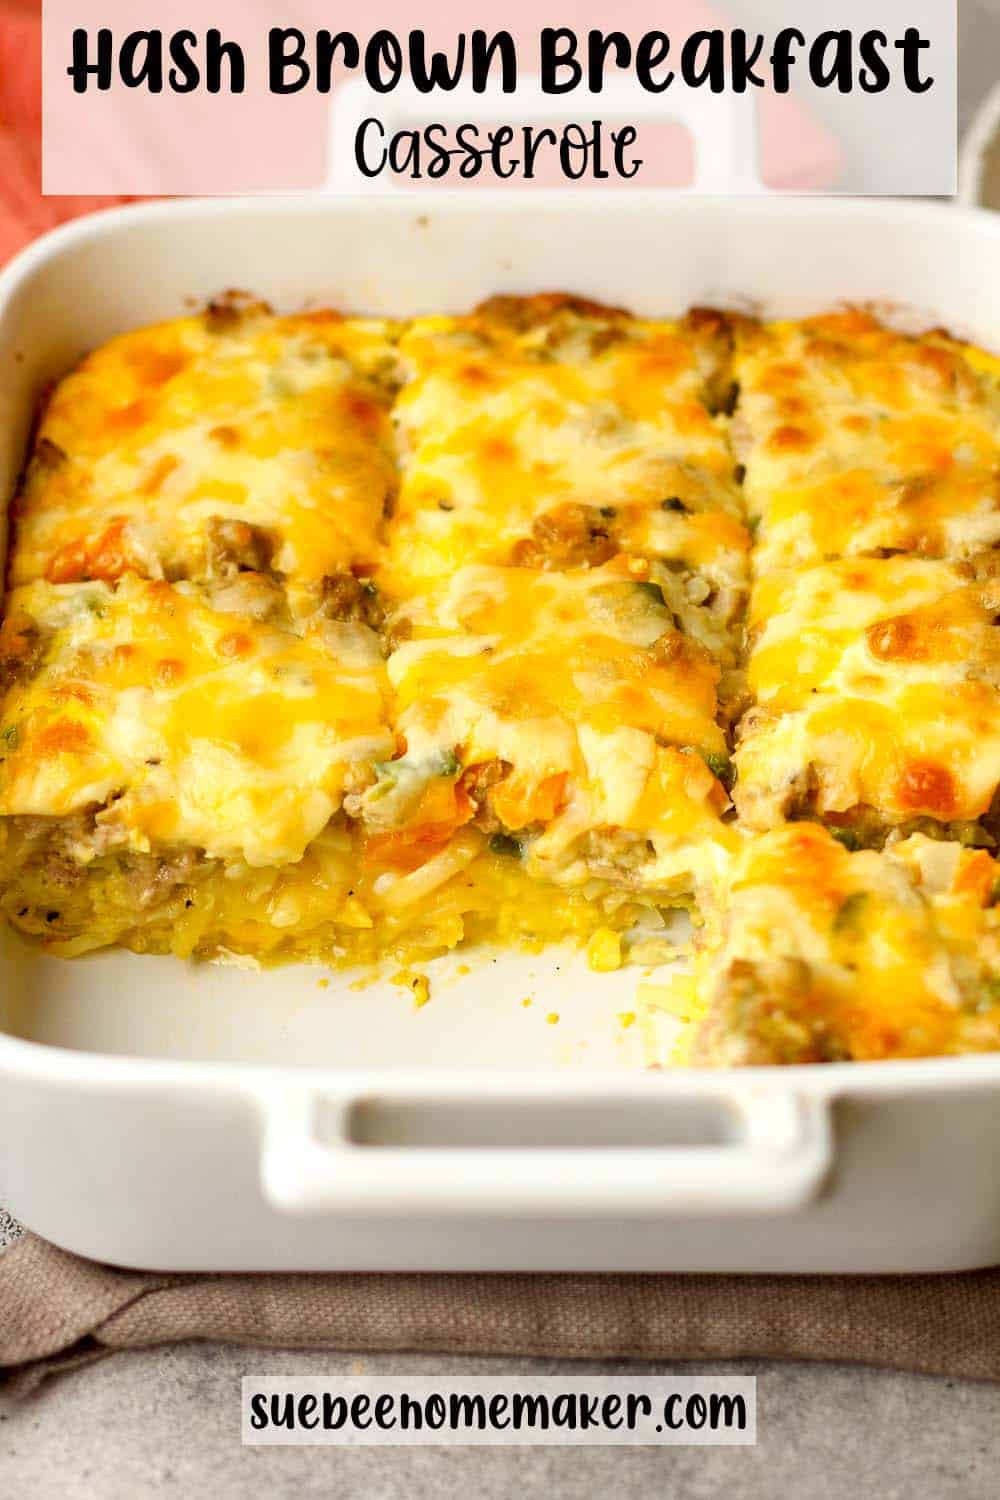 Side view of a square hash brown breakfast casserole.